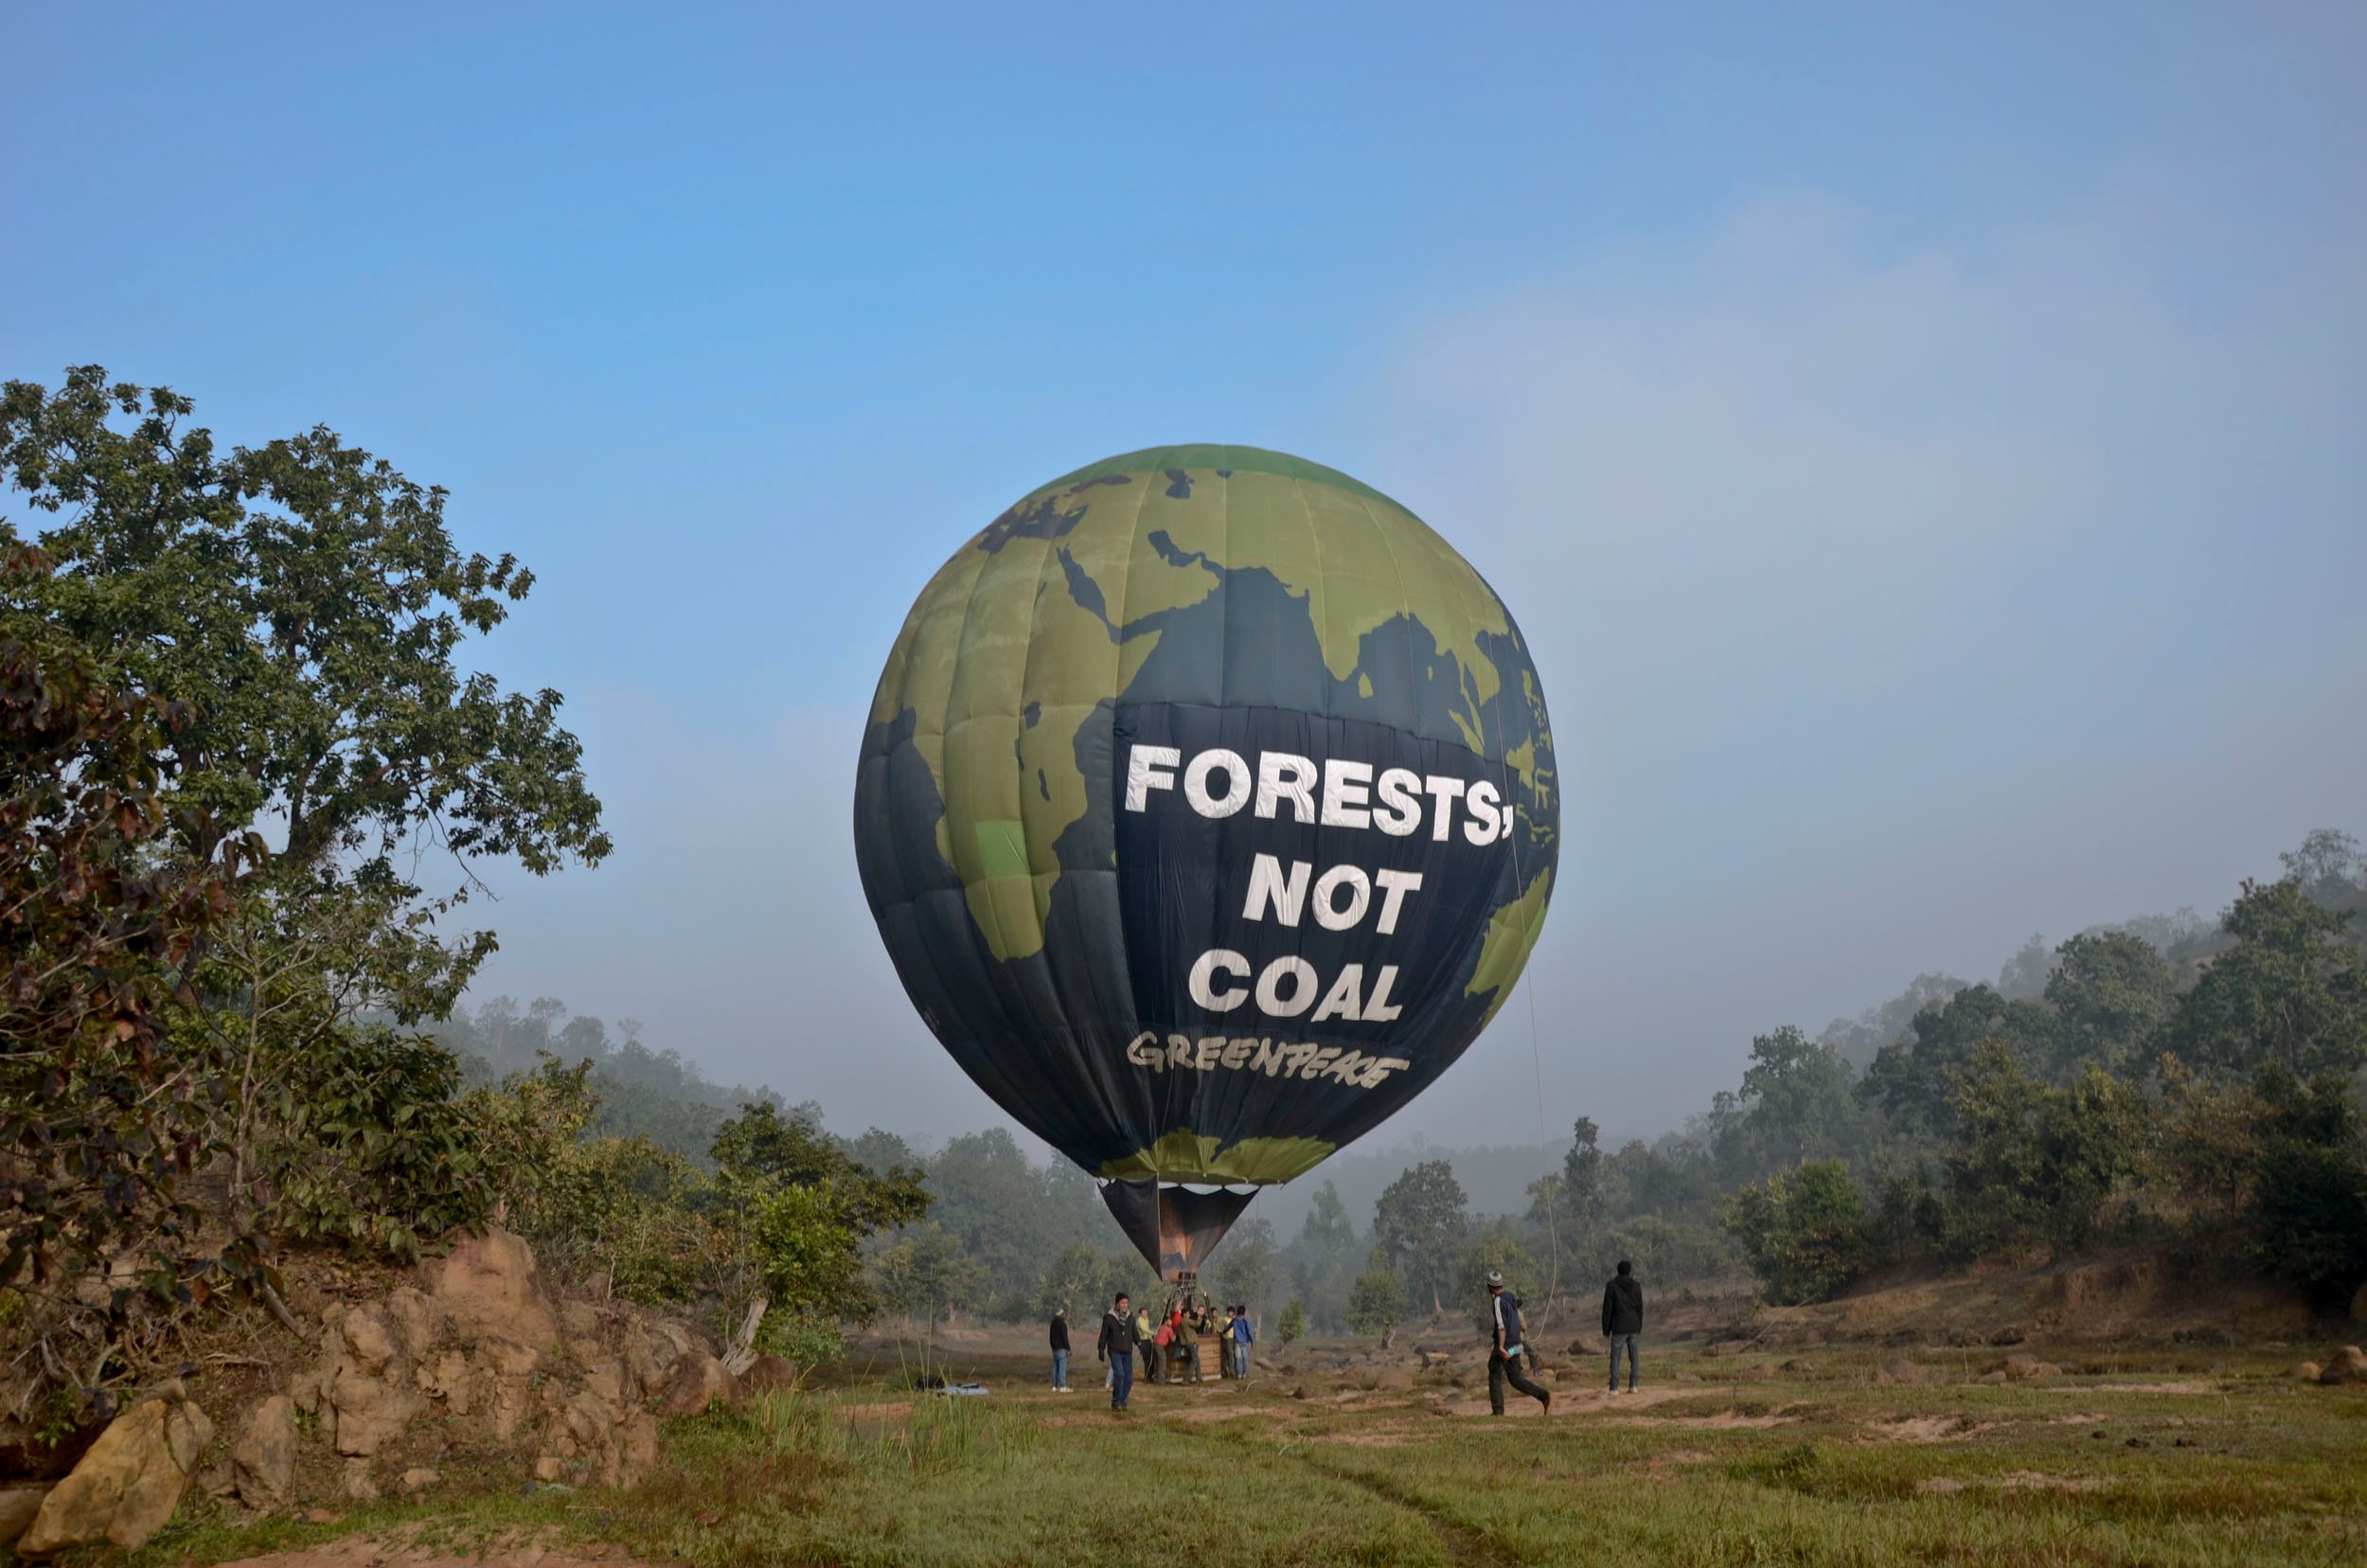 The Greenpeace balloon is prepared to fly over forests in Mahaan in Singrauli, located in the central Indian state of Madhya Pradesh. Indian film actor Abhay Deol will board one of the balloons to speak to the media and to highlight the threat to the pristine forests in Mahaan from coal mining.